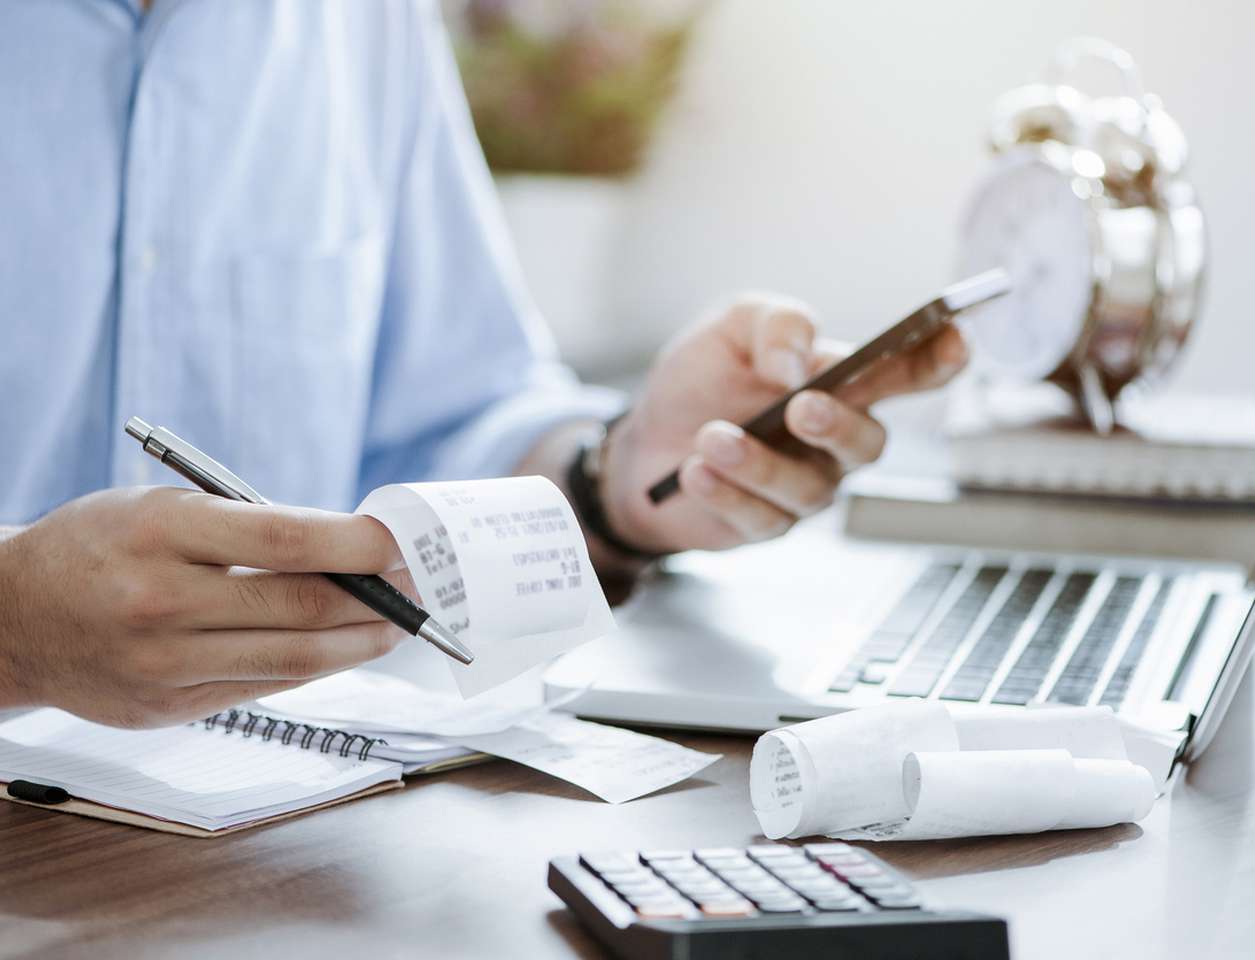 How to manage expenses and control costs, effortlessly